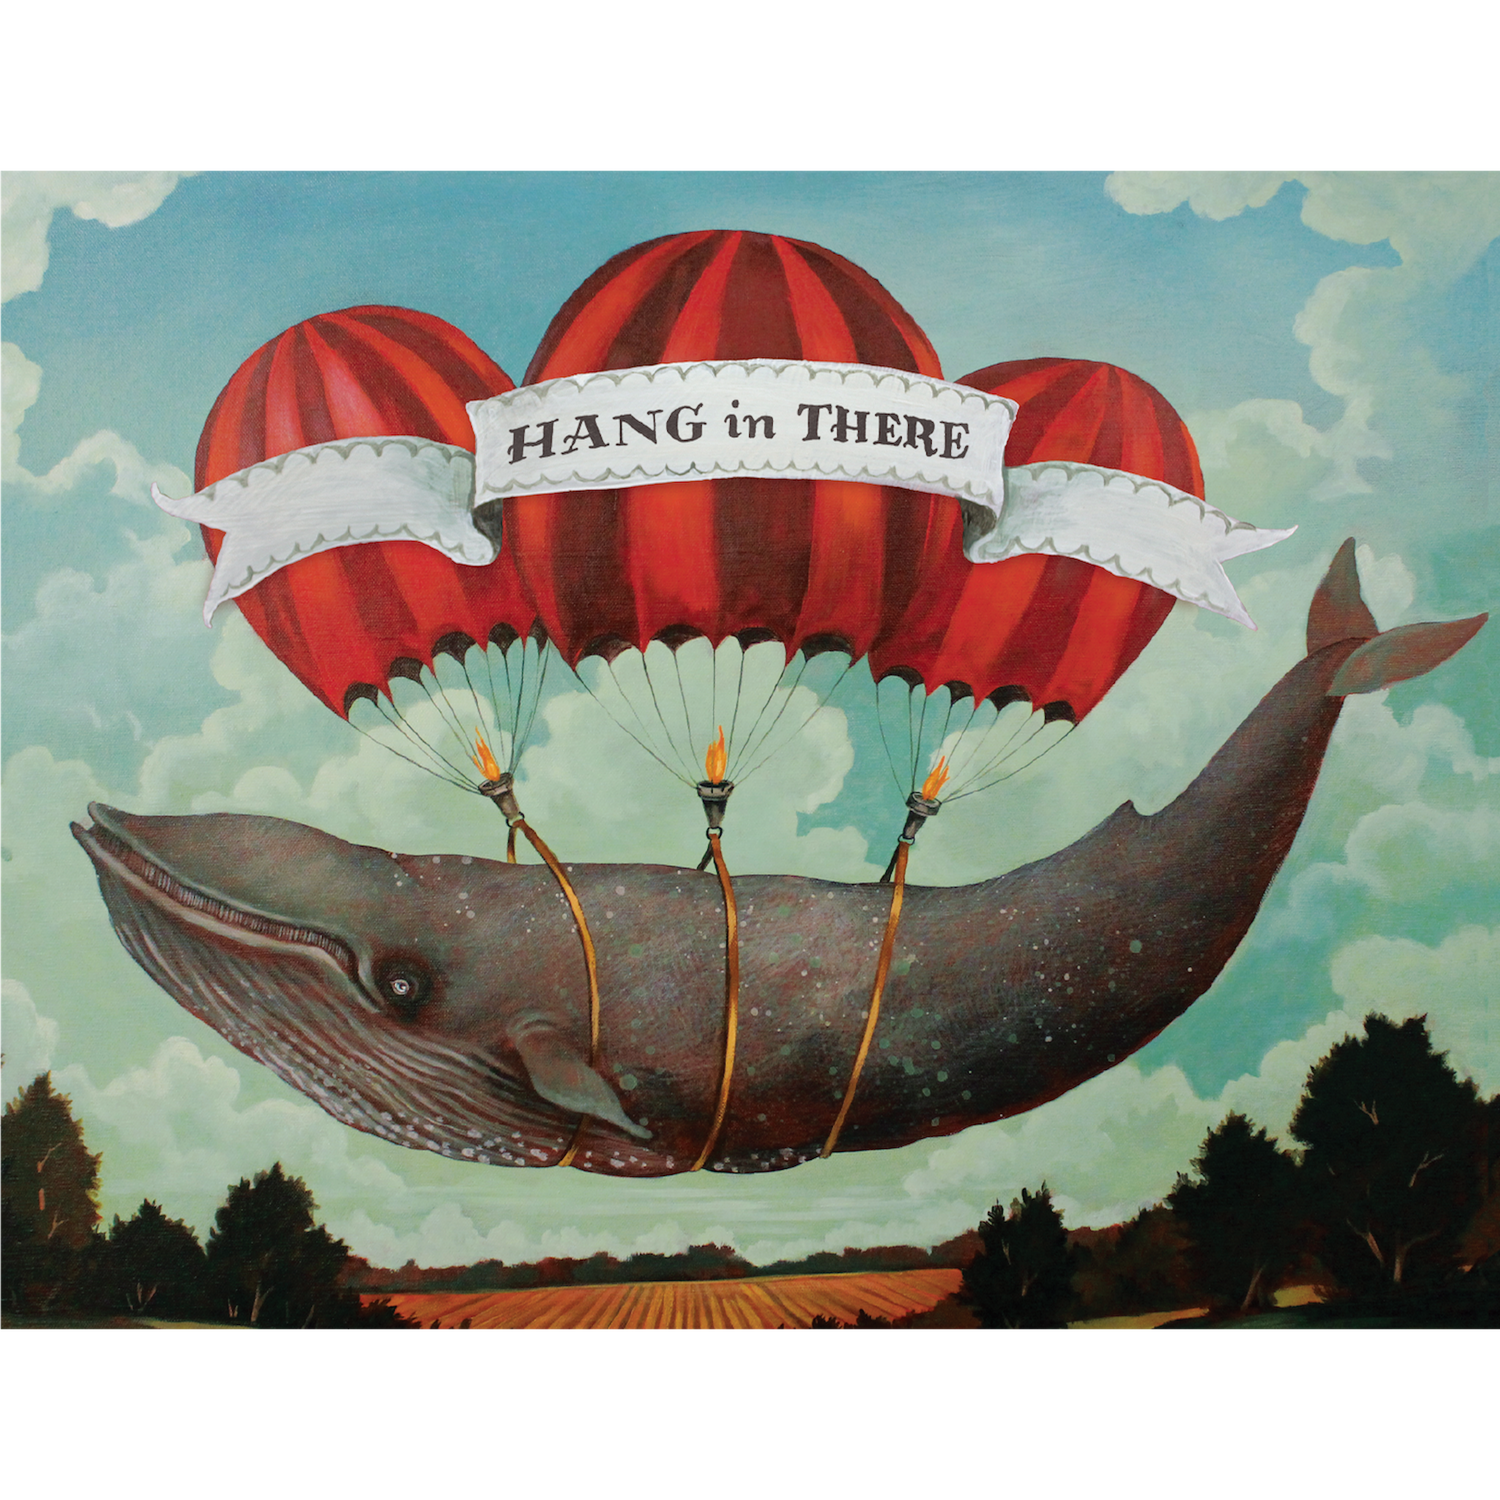 A whimsical illustration of a gray whale sailing through the cloudy blue sky by three red hot air balloons tied around its body, with a white banner reading &quot;HANG IN THERE&quot; flowing in front of the balloons.